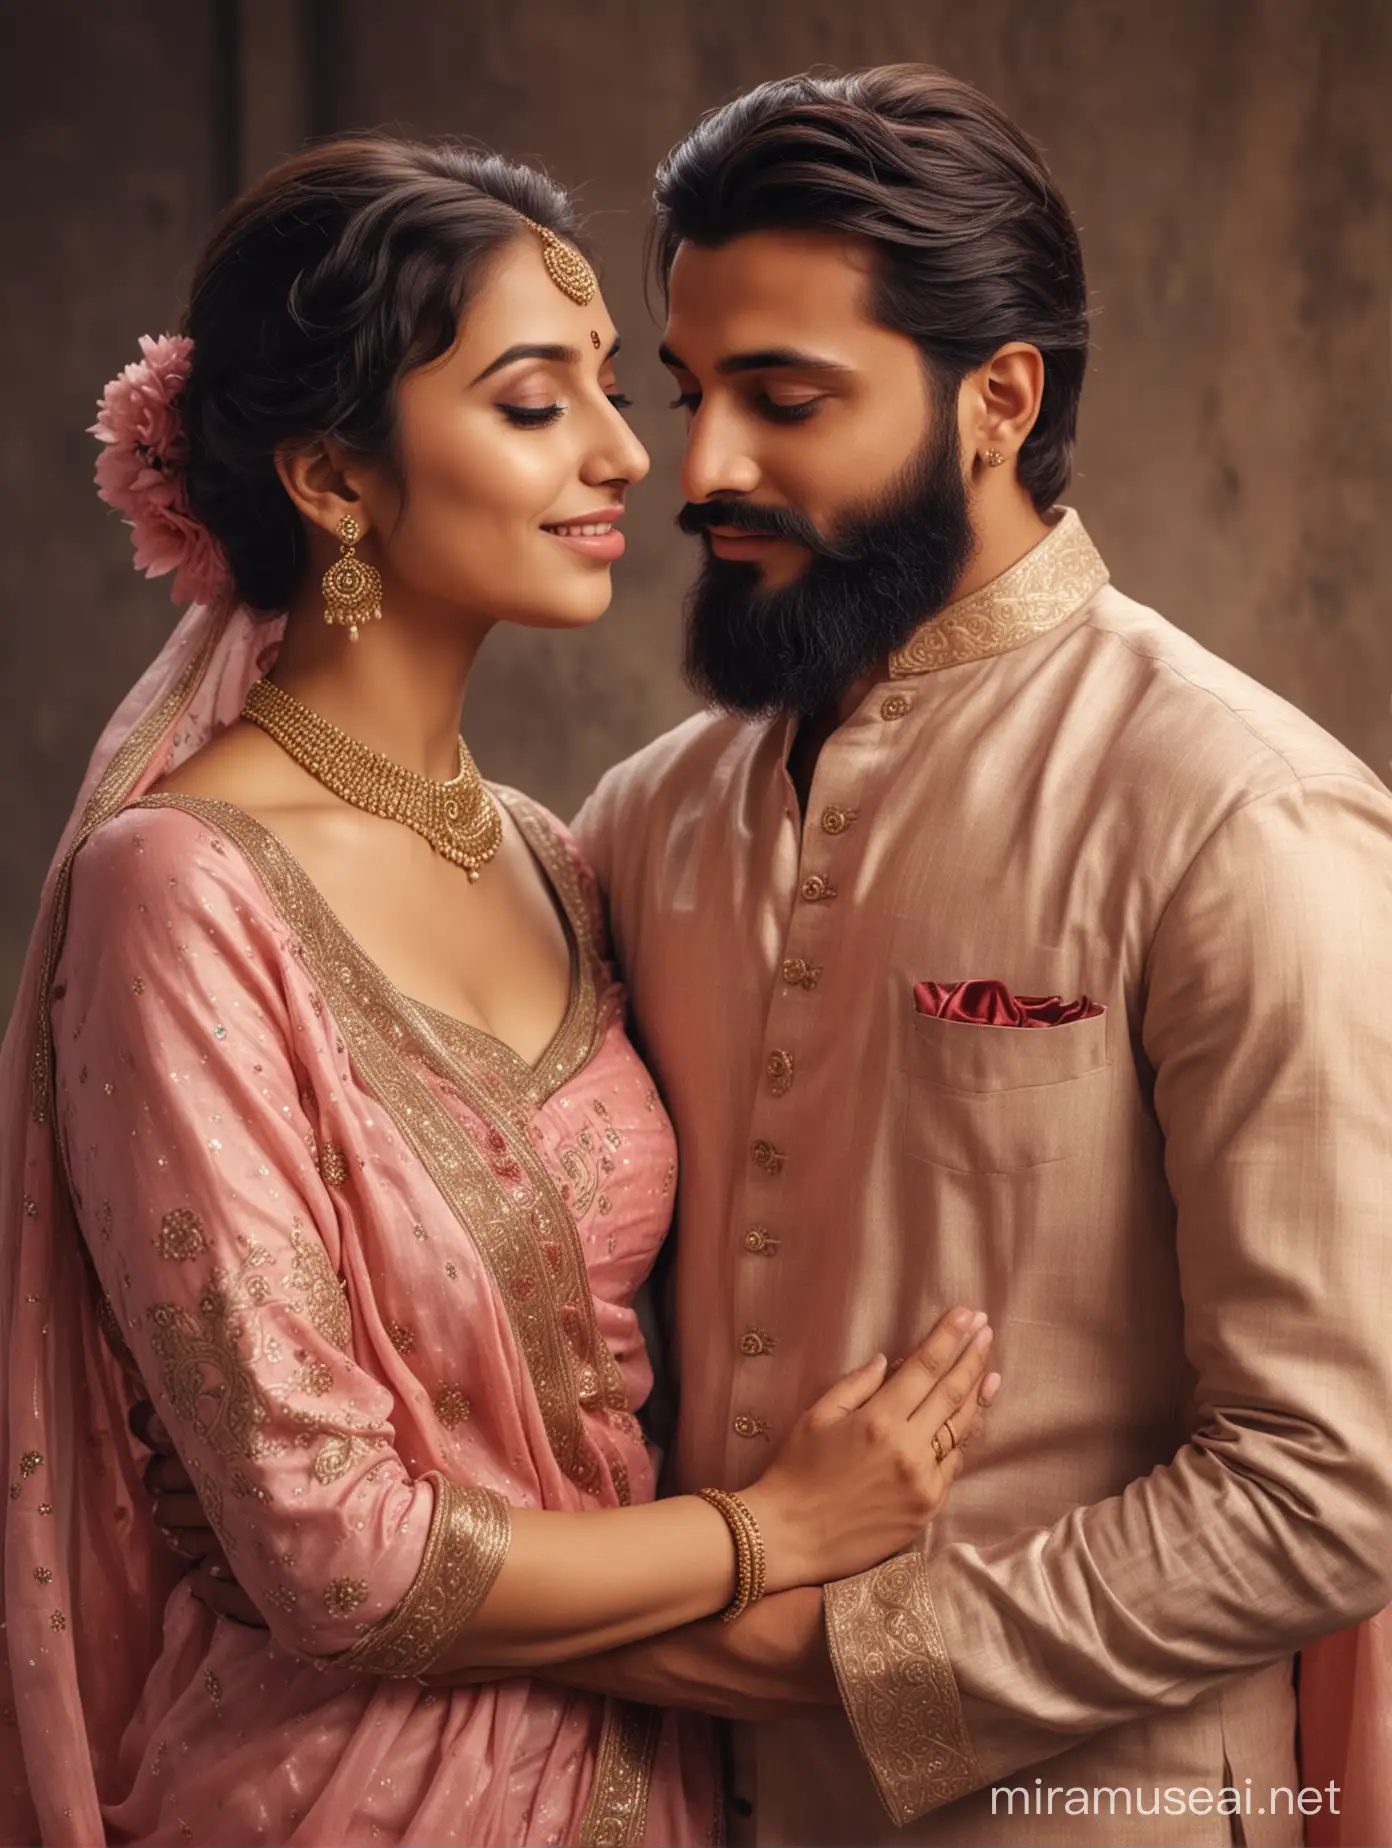 full portrait photo of most beautiful european couple as most beautiful indian couple, most beautiful girl in saree, full makeup, girl embracing man with emotional attachment, excitement and reunited expression, man with stylish beard and in formals, photo realistic, 4k.